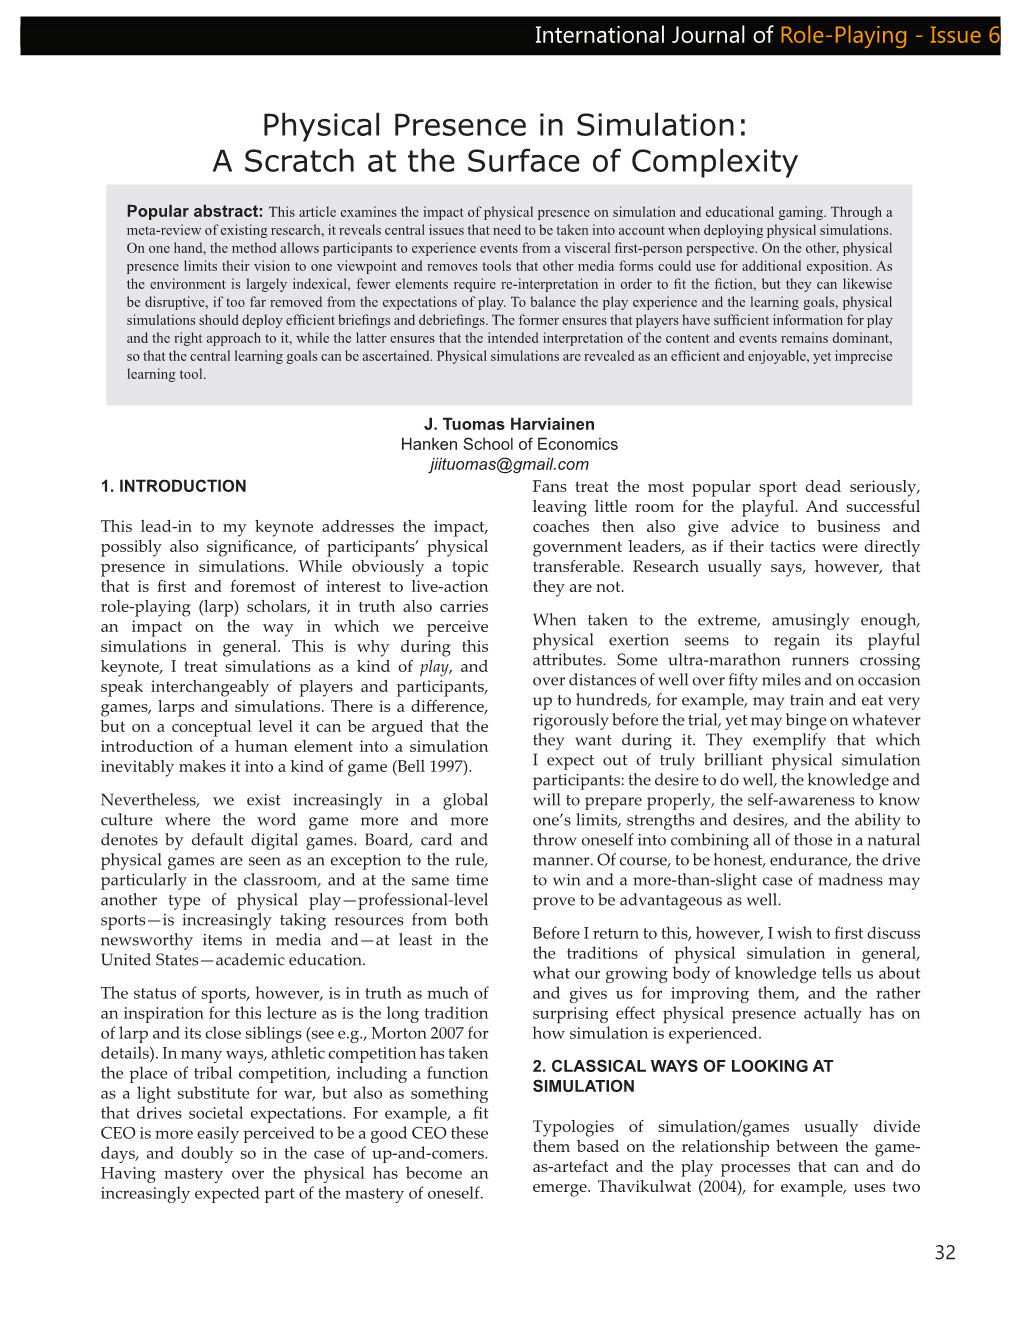 Physical Presence in Simulation: a Scratch at the Surface of Complexity